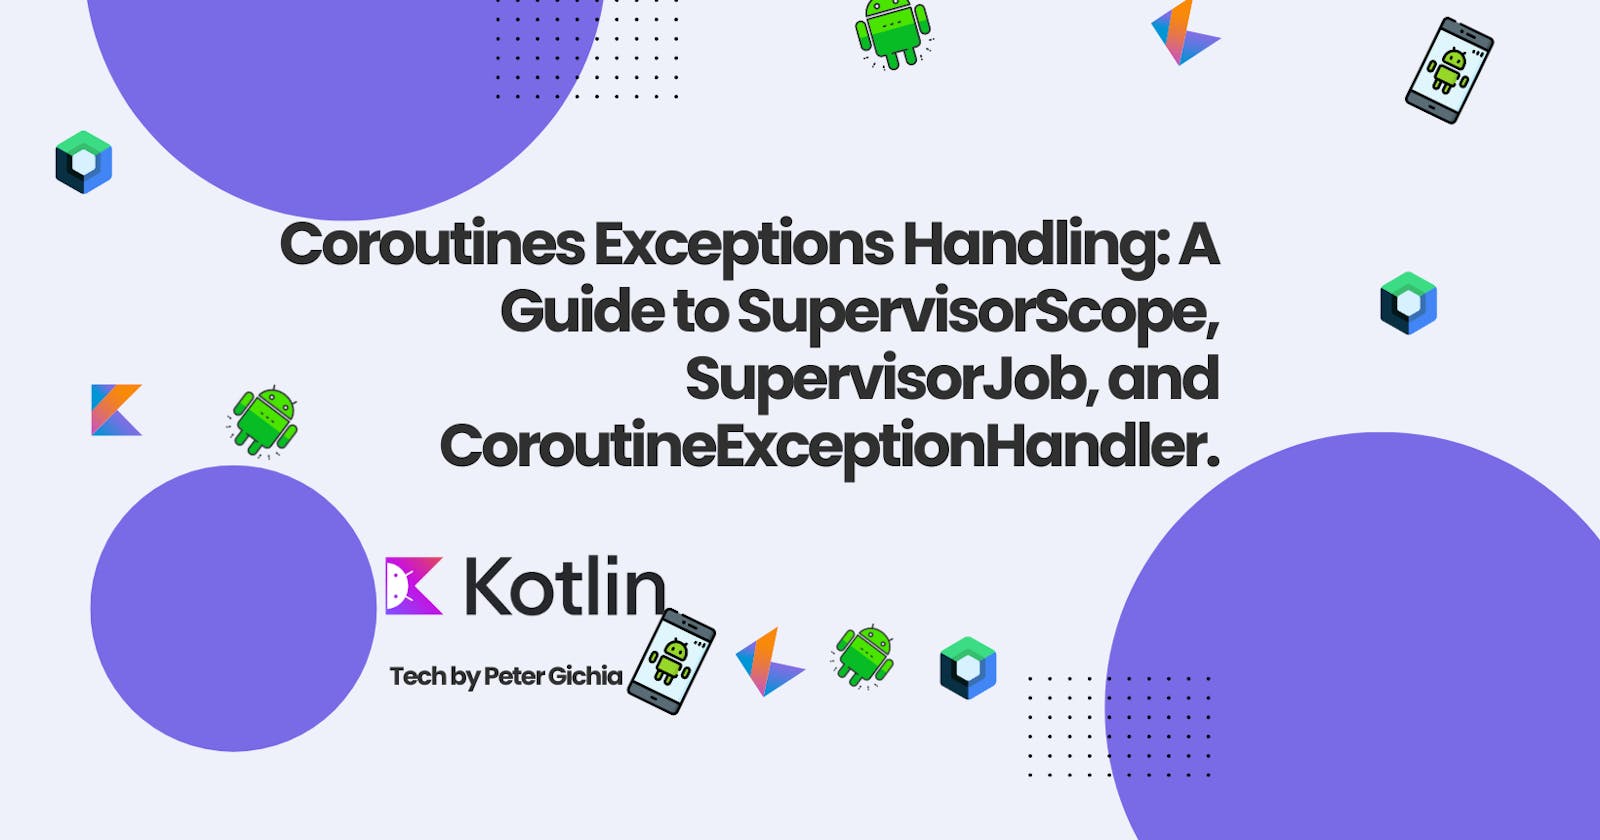 Coroutines Exceptions Handling: A Guide to SupervisorScope, SupervisorJob, and CoroutineExceptionHandler.